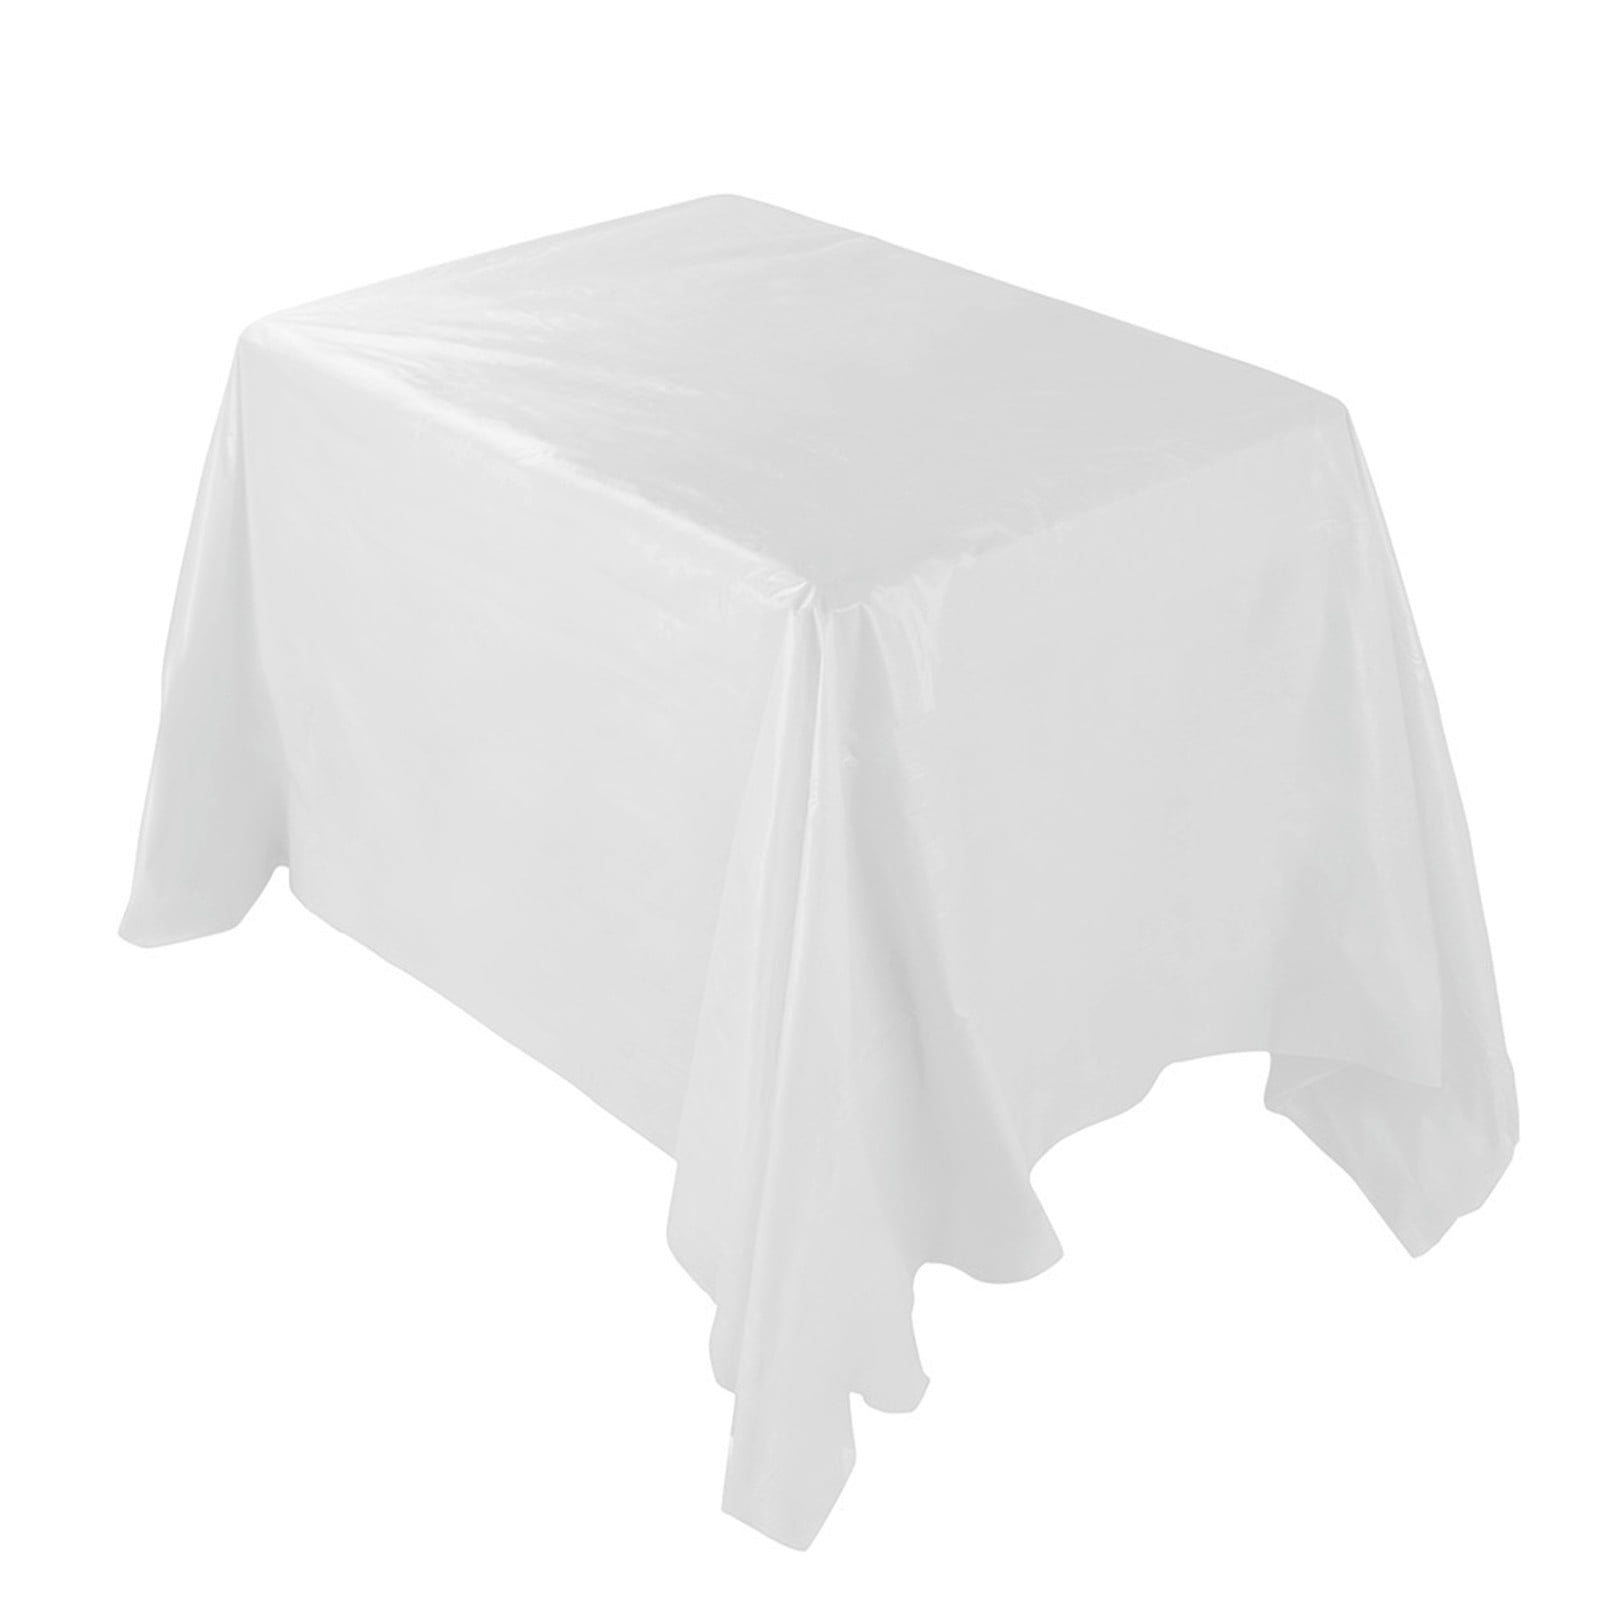 Rectange Plastic TABLECOVERS Table Cloth Cover Party Catering Events Tableware 